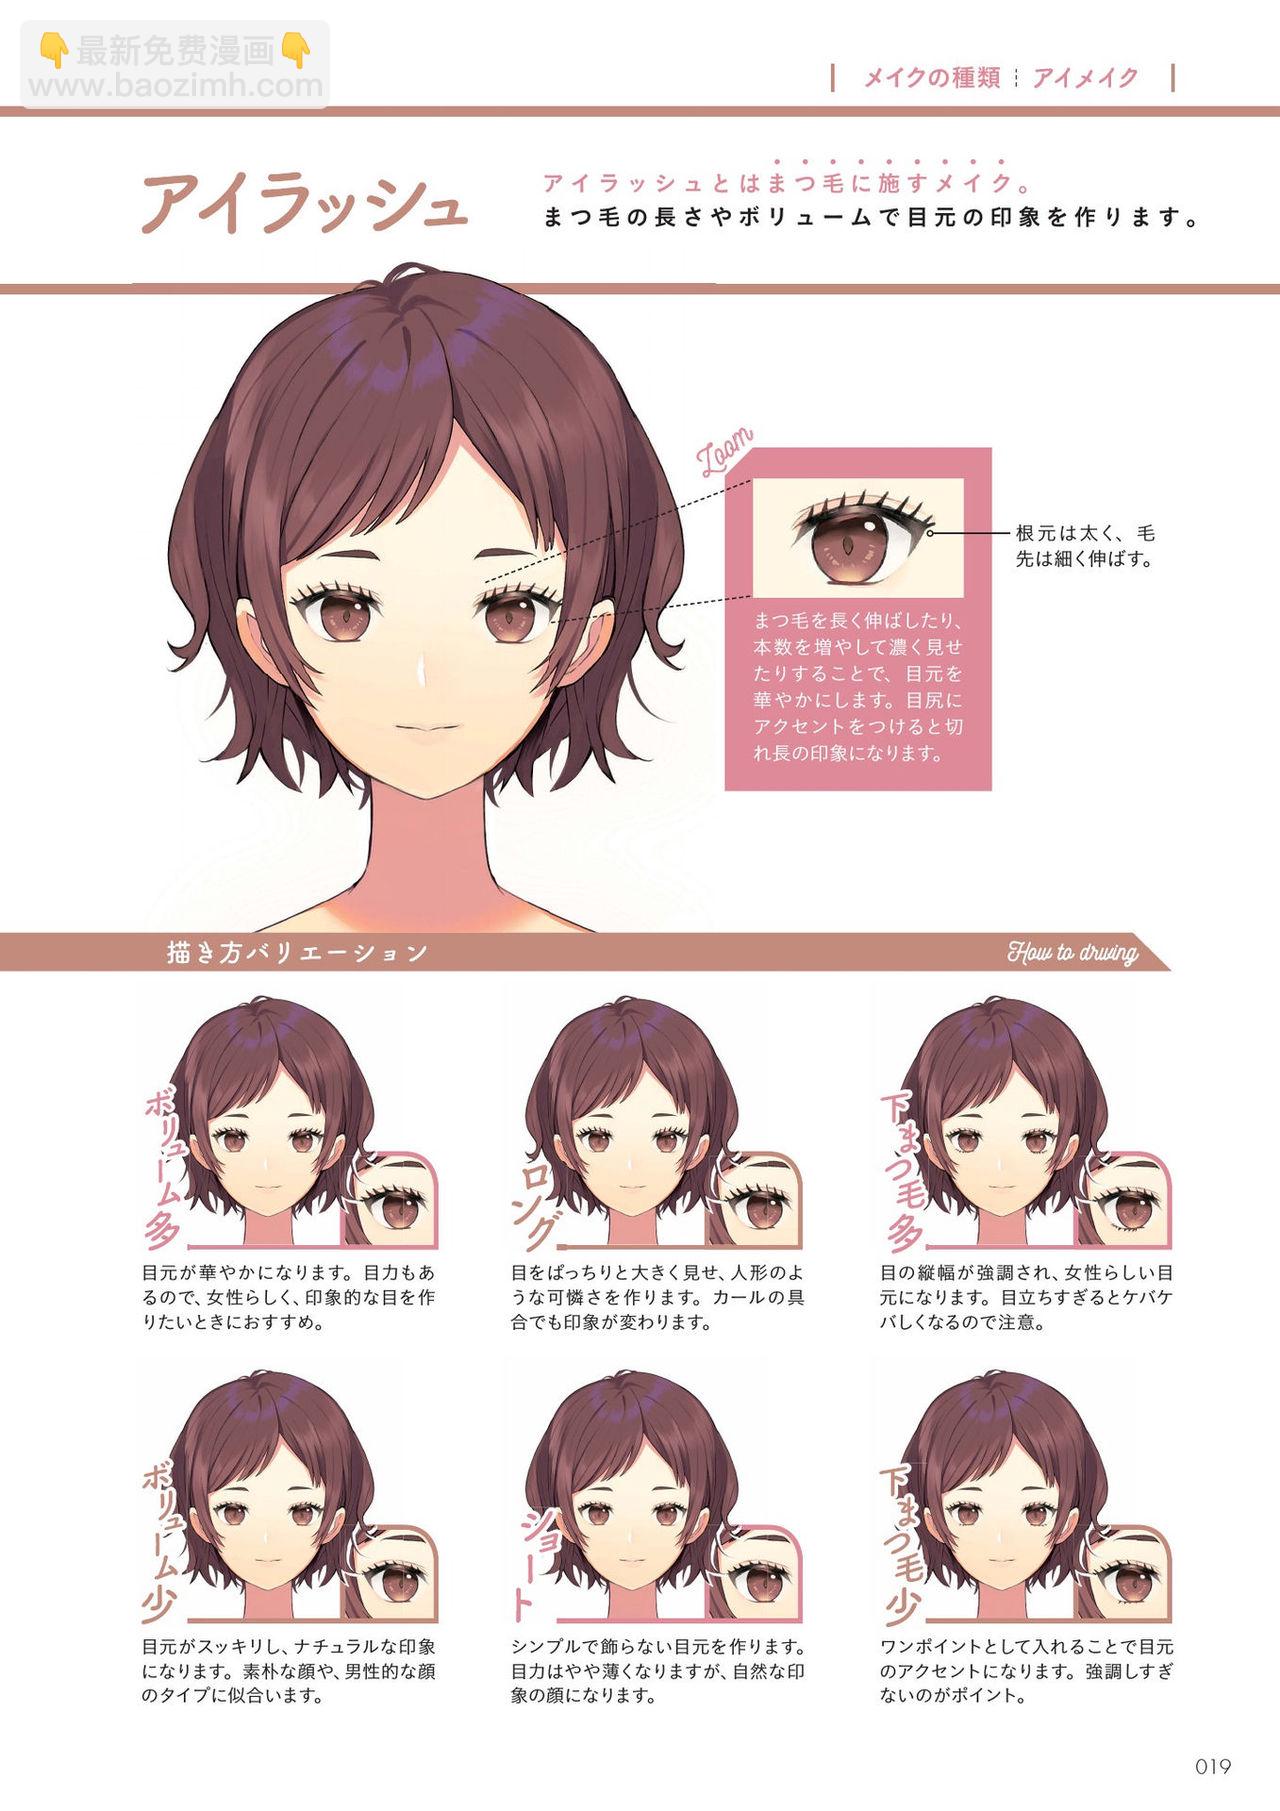 [sogawa]Super drawable series Techniques for drawing female characters with makeup  - 1話(1/4) - 5